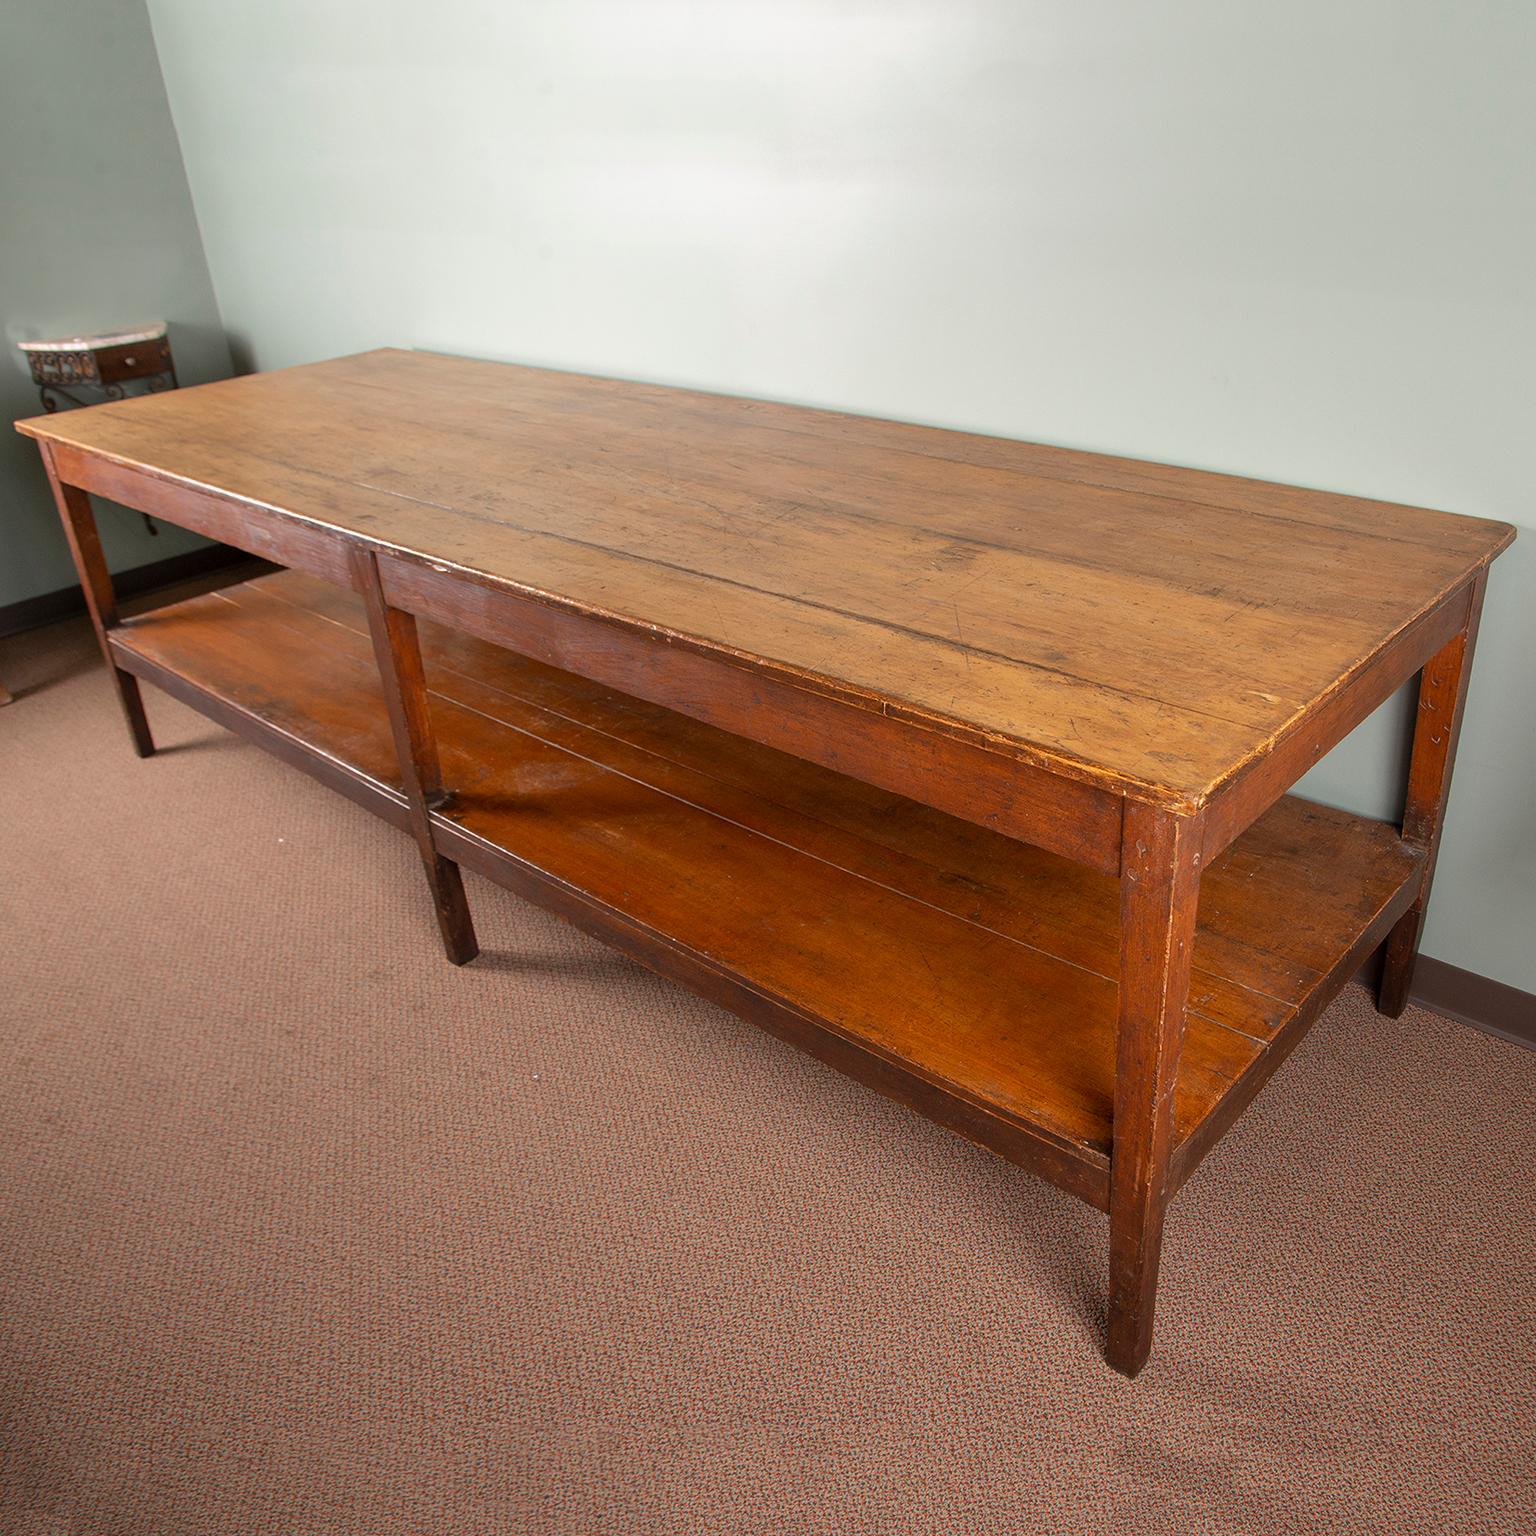 19th century French drapers table is made of pine and retains its original finish. This over-sized working table was originally used by seamstresses to lay out, cut and measure fabric. Now this makes a great dining or work table. Very sturdy with